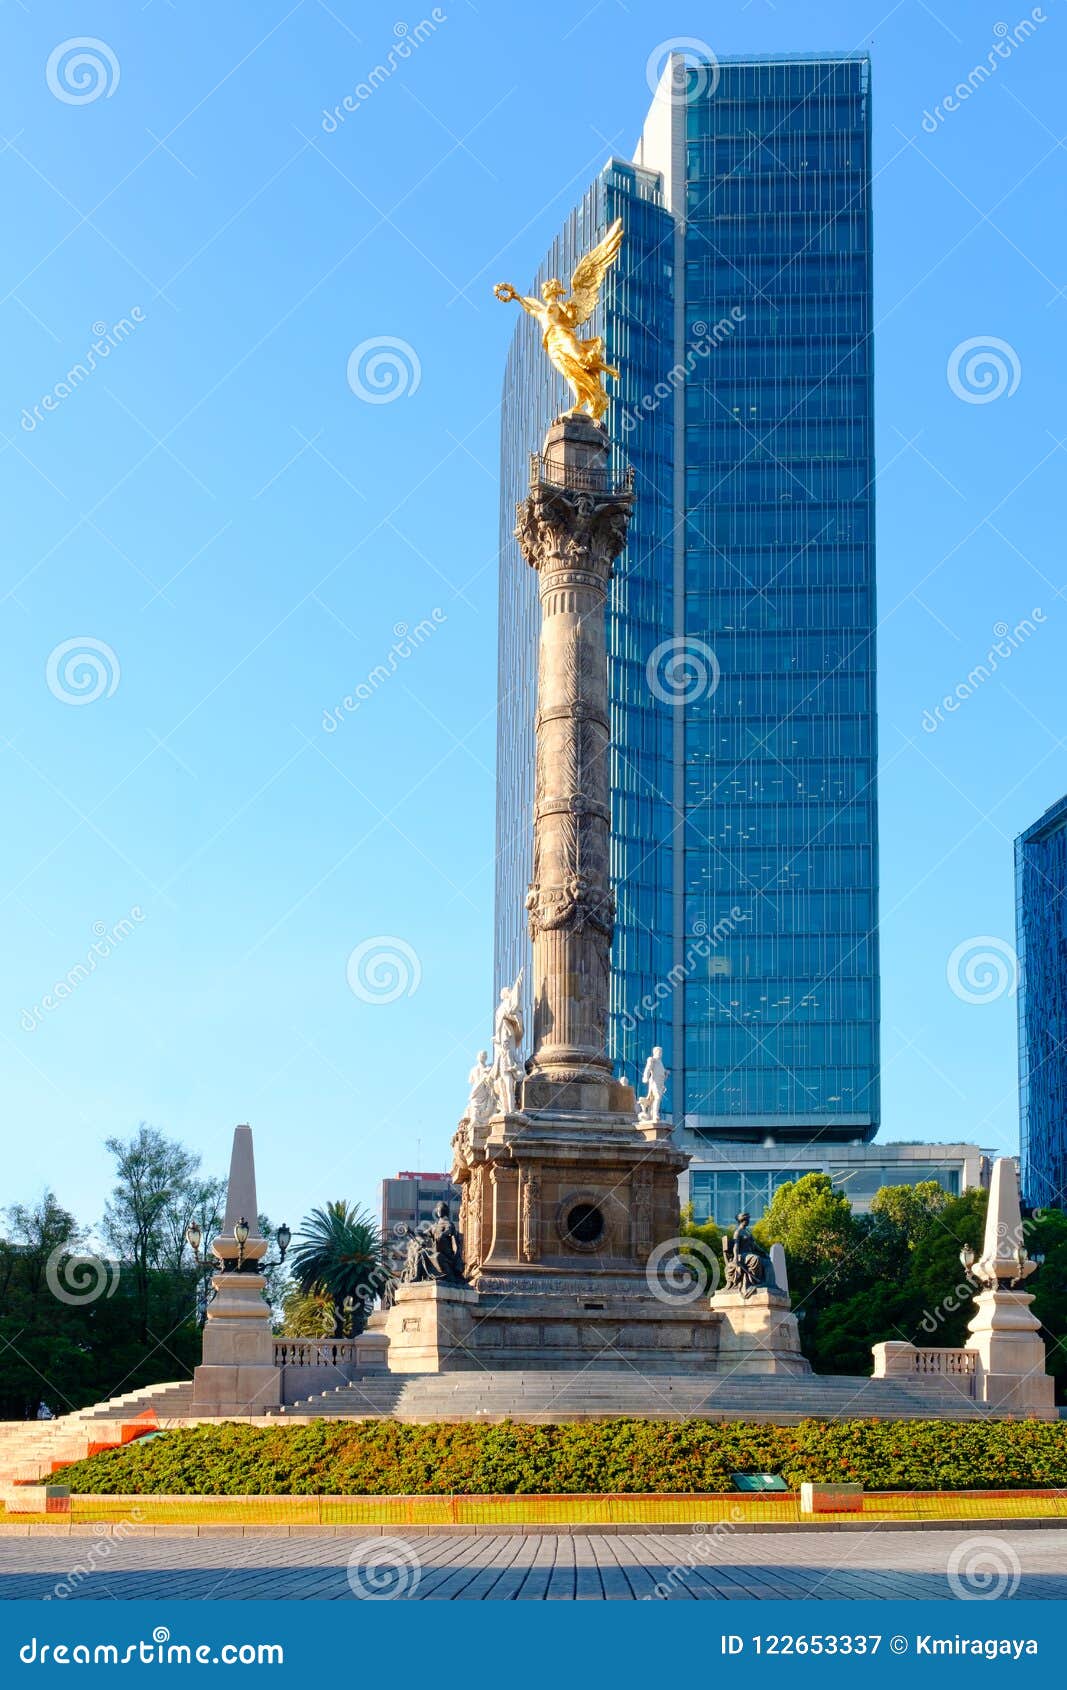 the angel of independence at paseo de la reforma in mexico city